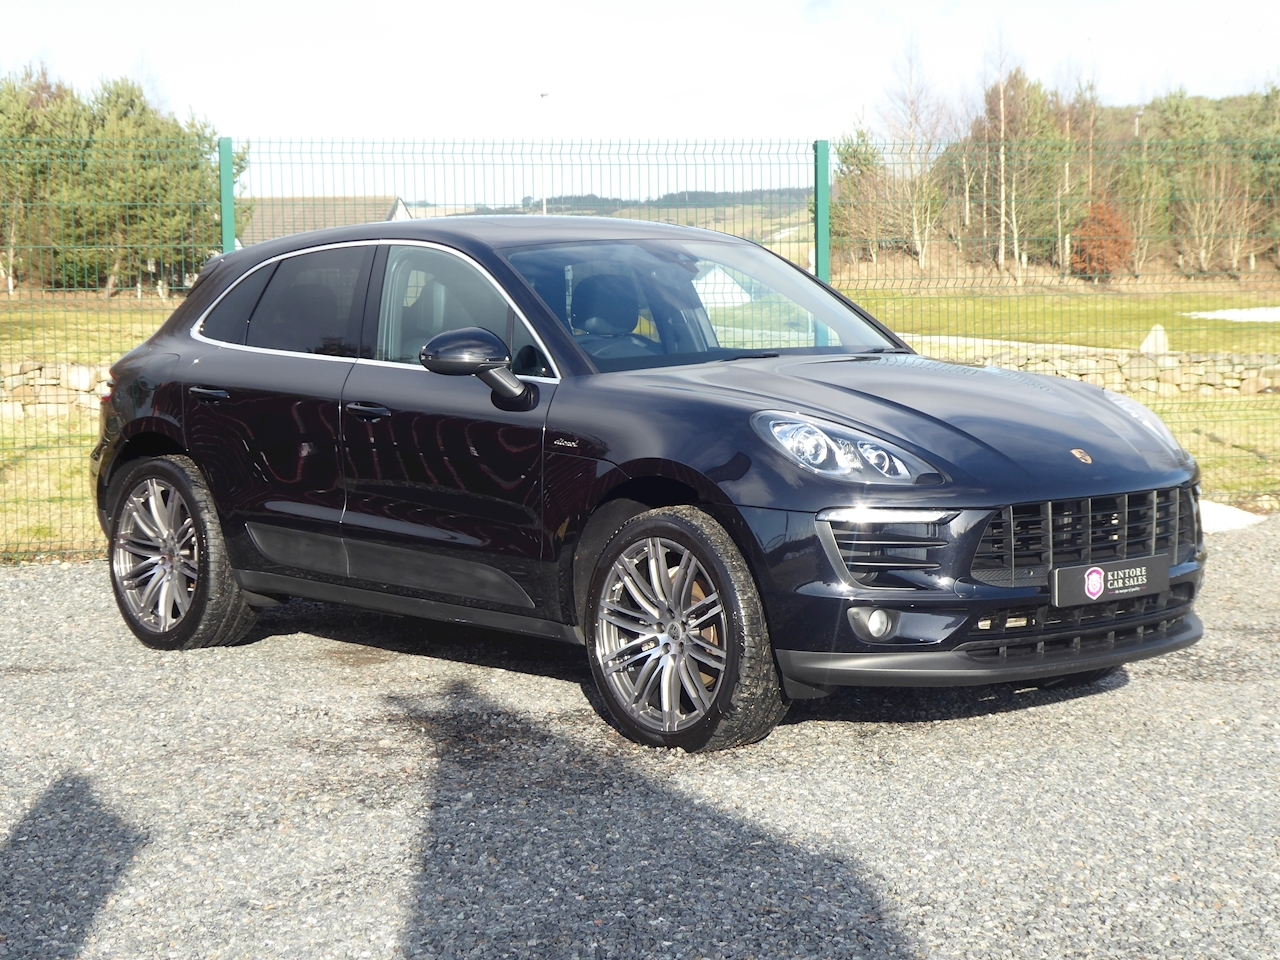 Macan 3.0 TD V6 S PDK 4WD 3.0 5dr SUV Automatic Diesel